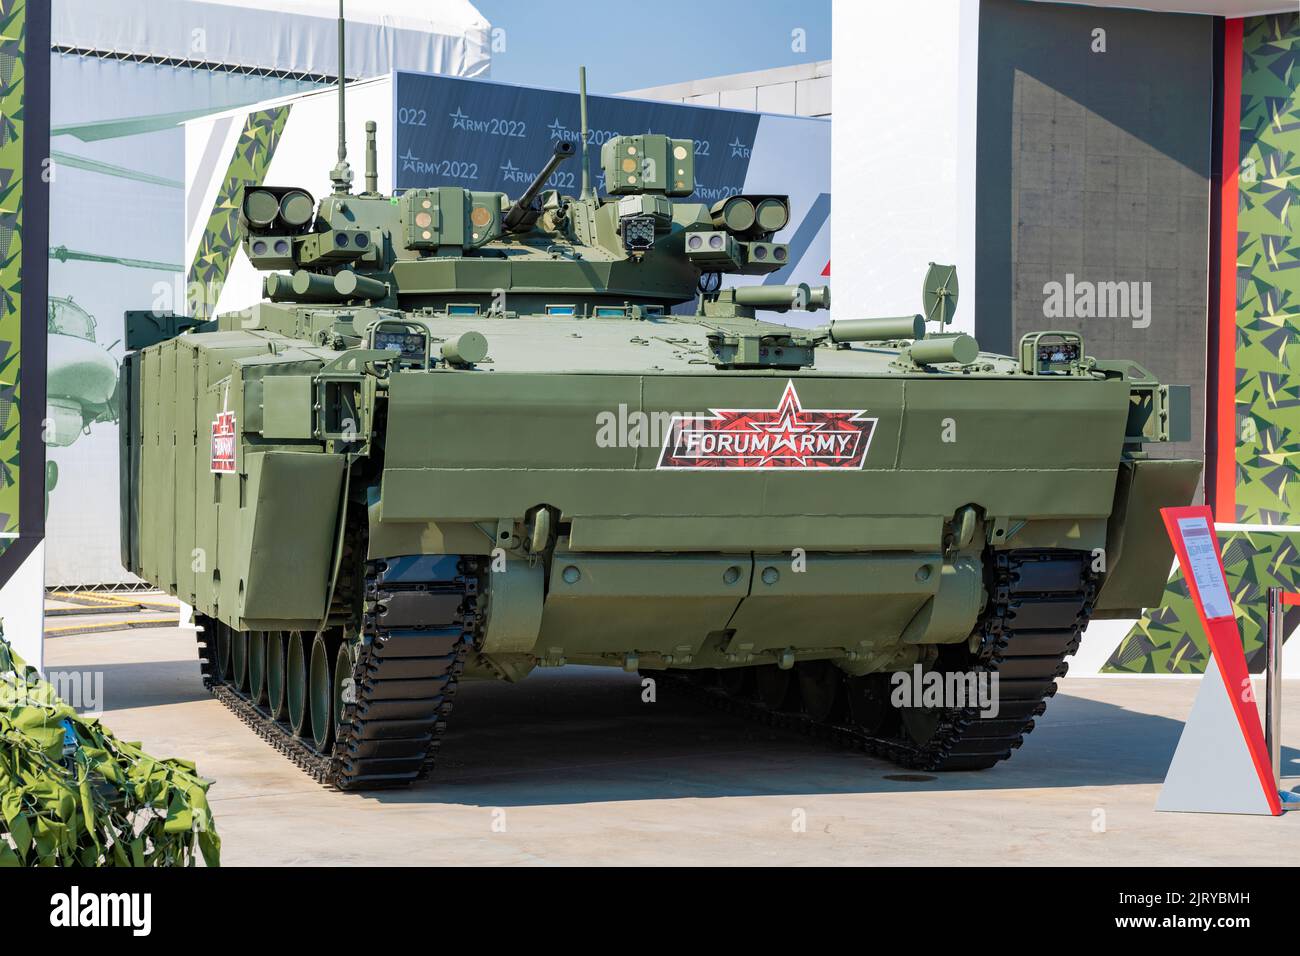 MOSCOW REGION, RUSSIA - AUGUST 18, 2022: Infantry fighting vehicle based on the Kurganets-25 universal tracked platform. Exhibit of the international Stock Photo